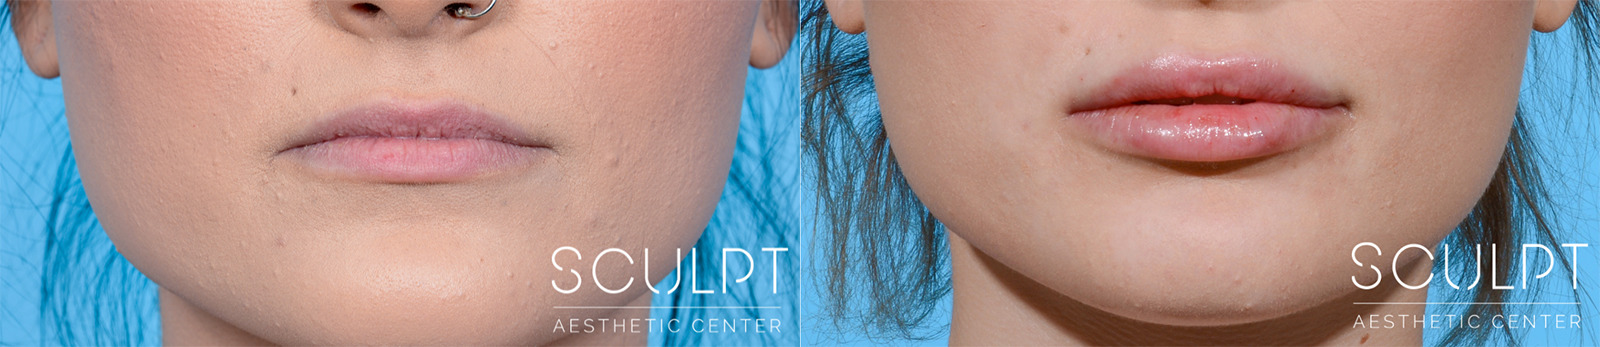 Facial Filler Before and After Photo by Sculpt Aesthetic Center in Frisco, TX